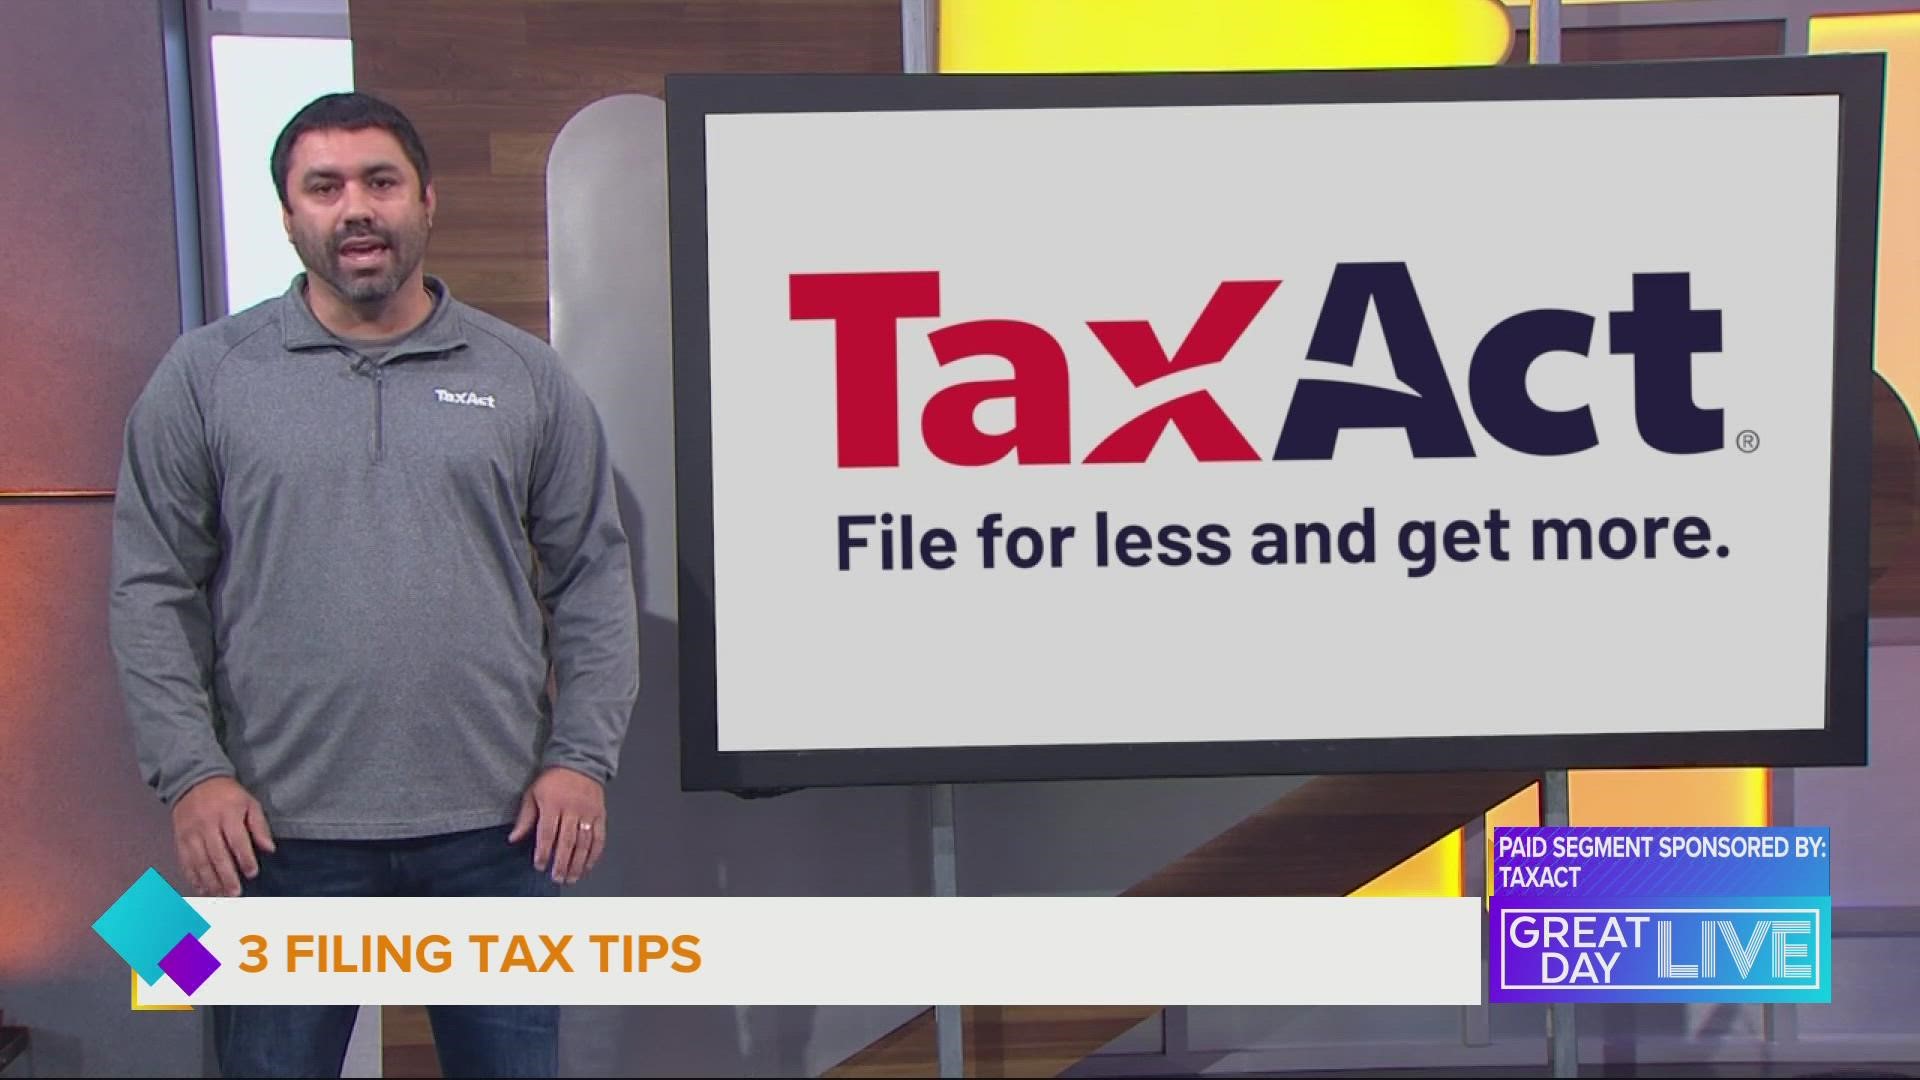 Leading tax software company shares tips on filing your own taxes